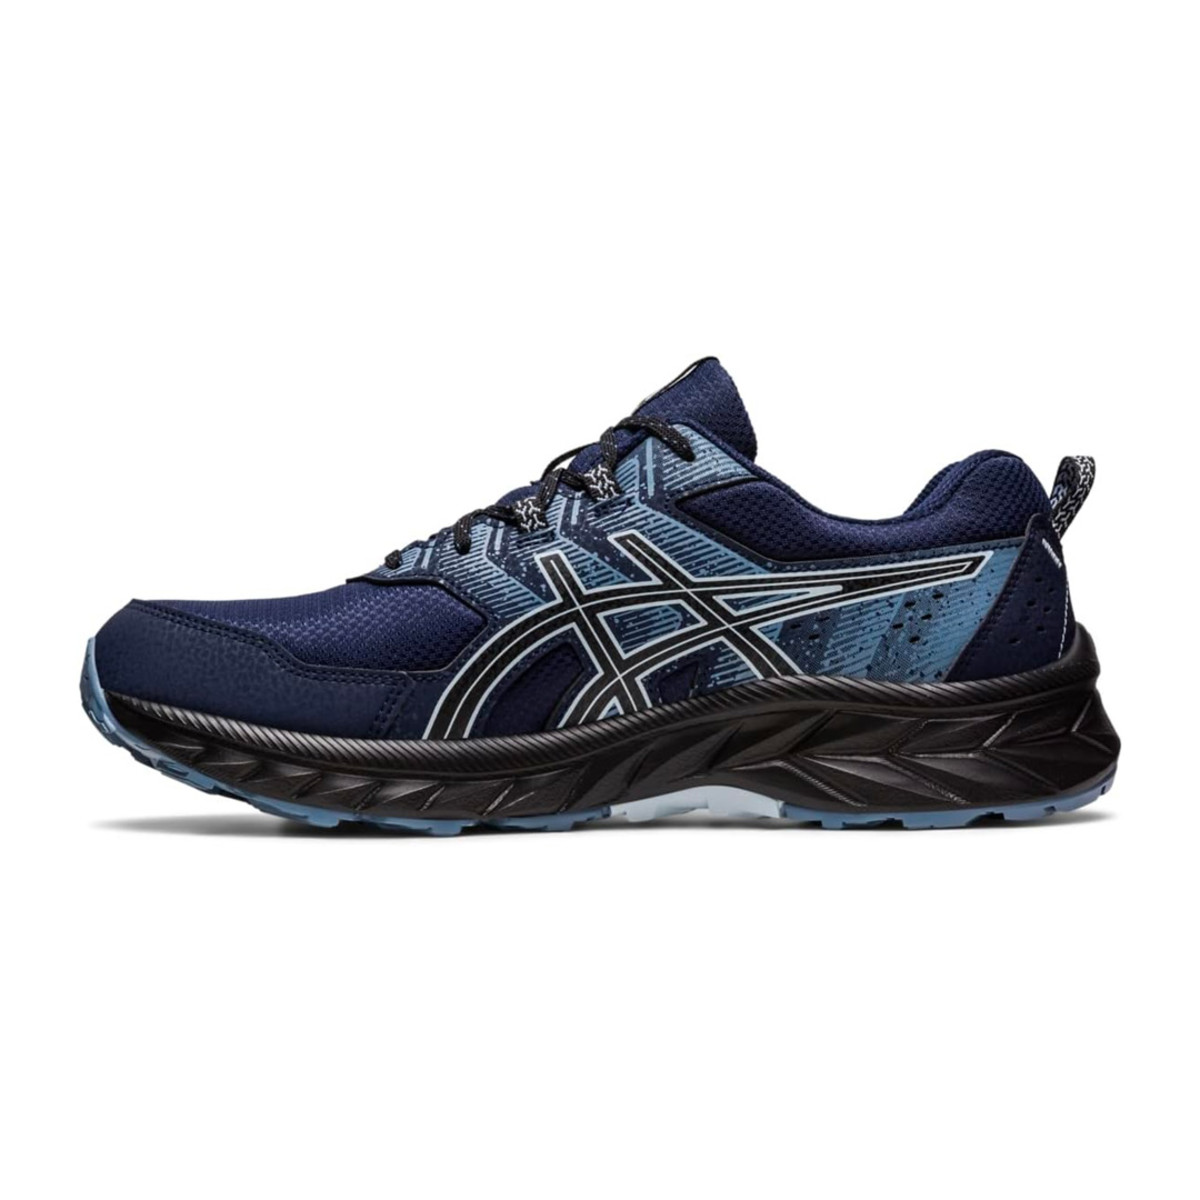 The Asics Gel-Venture 9 Is on Sale for Just $60 on Amazon - Men's Journal